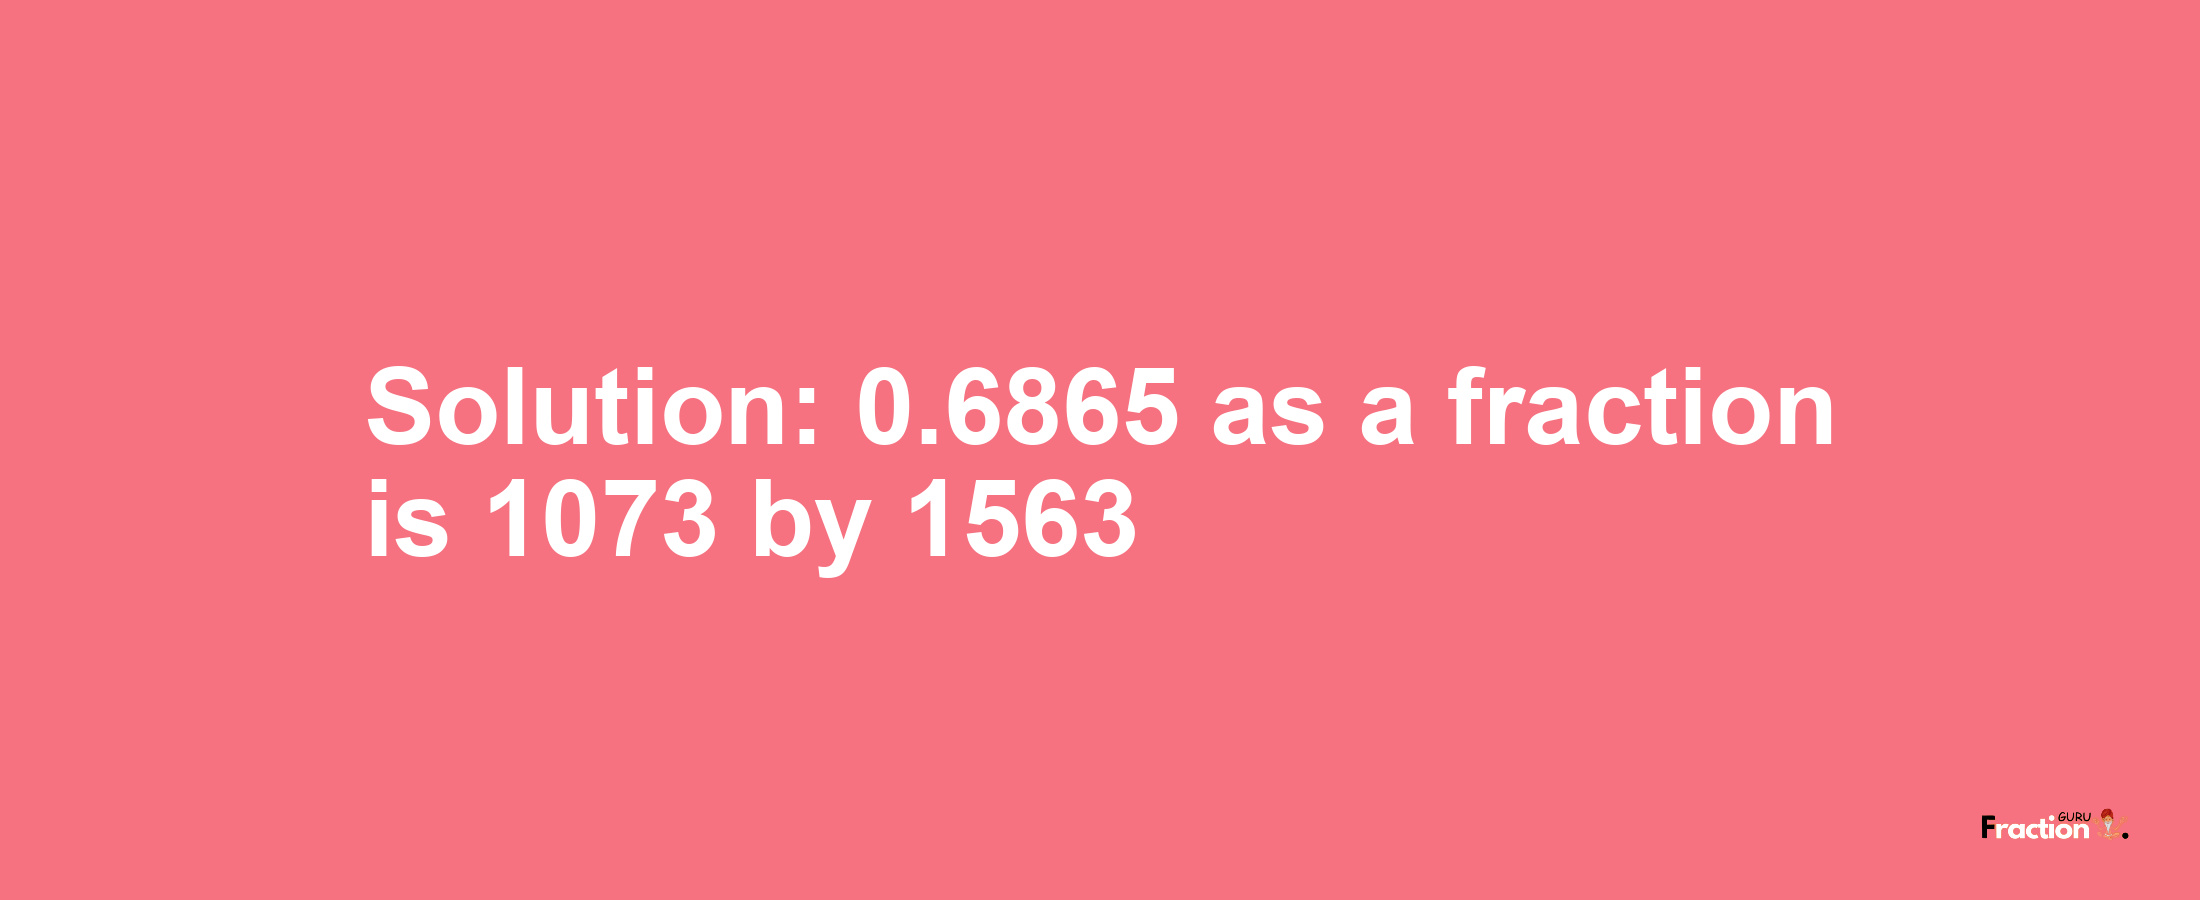 Solution:0.6865 as a fraction is 1073/1563